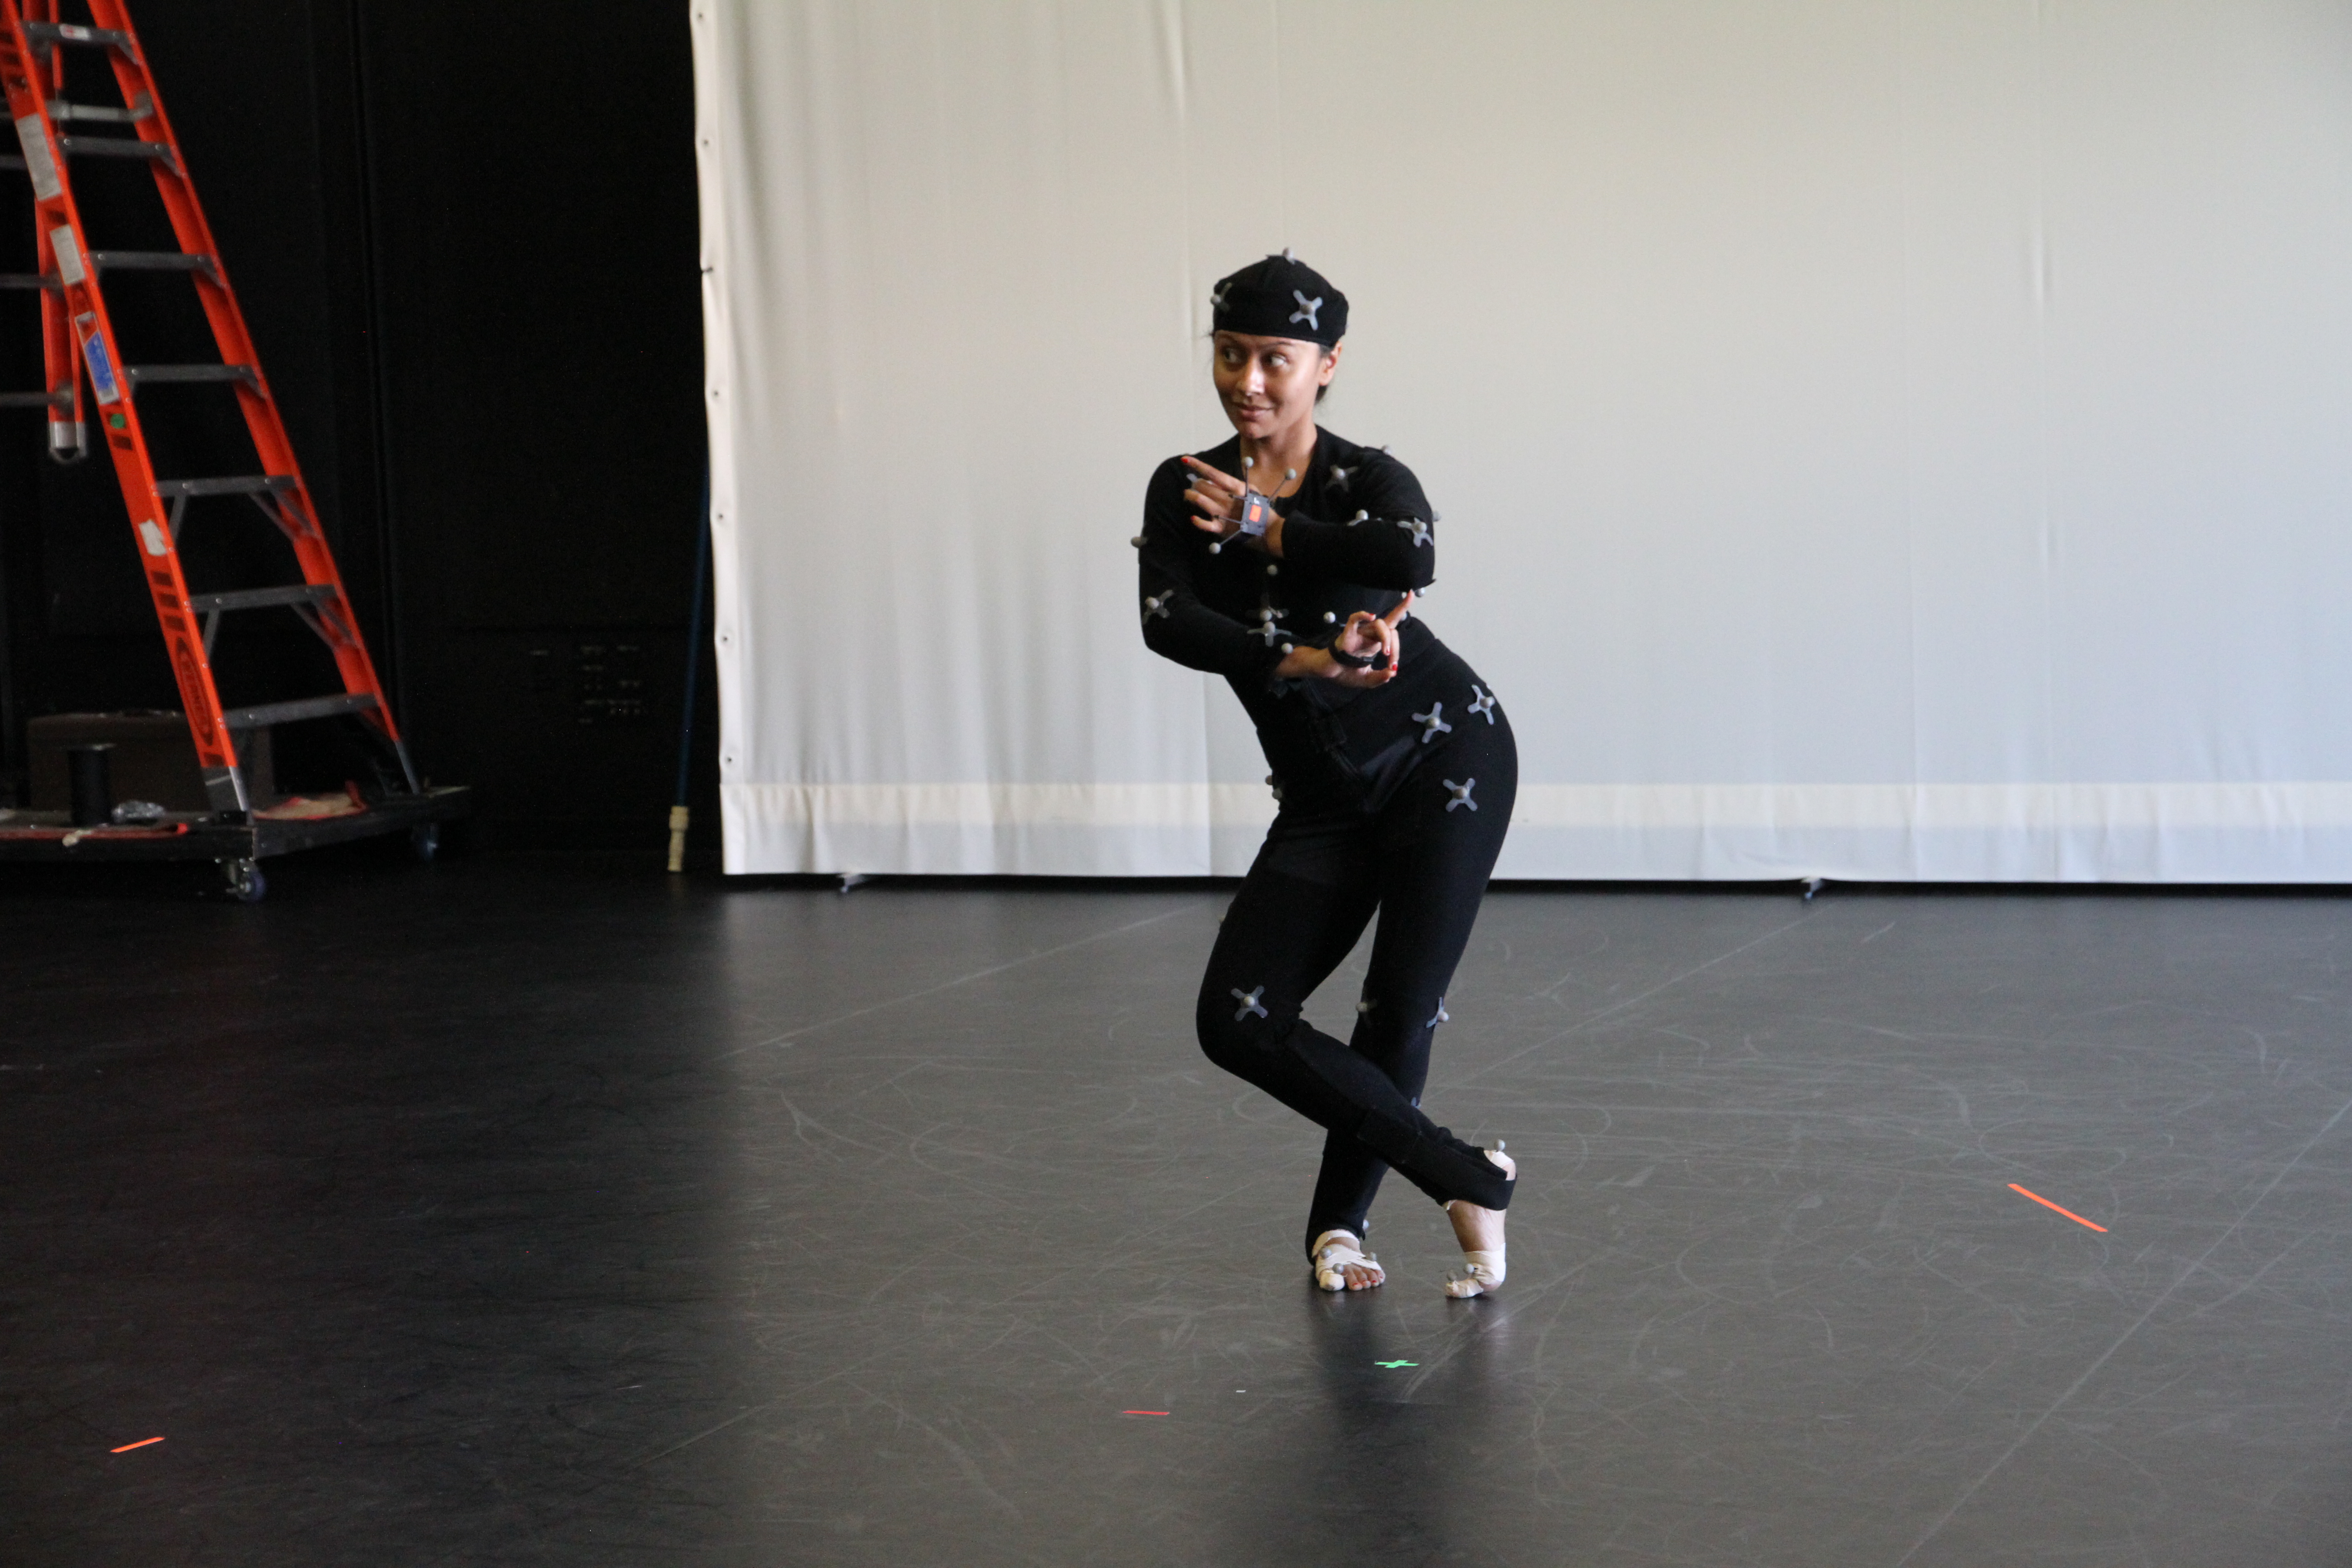 woman wearing black dancing in extreme s-curve; small lights are placed on limbs, waist, and head